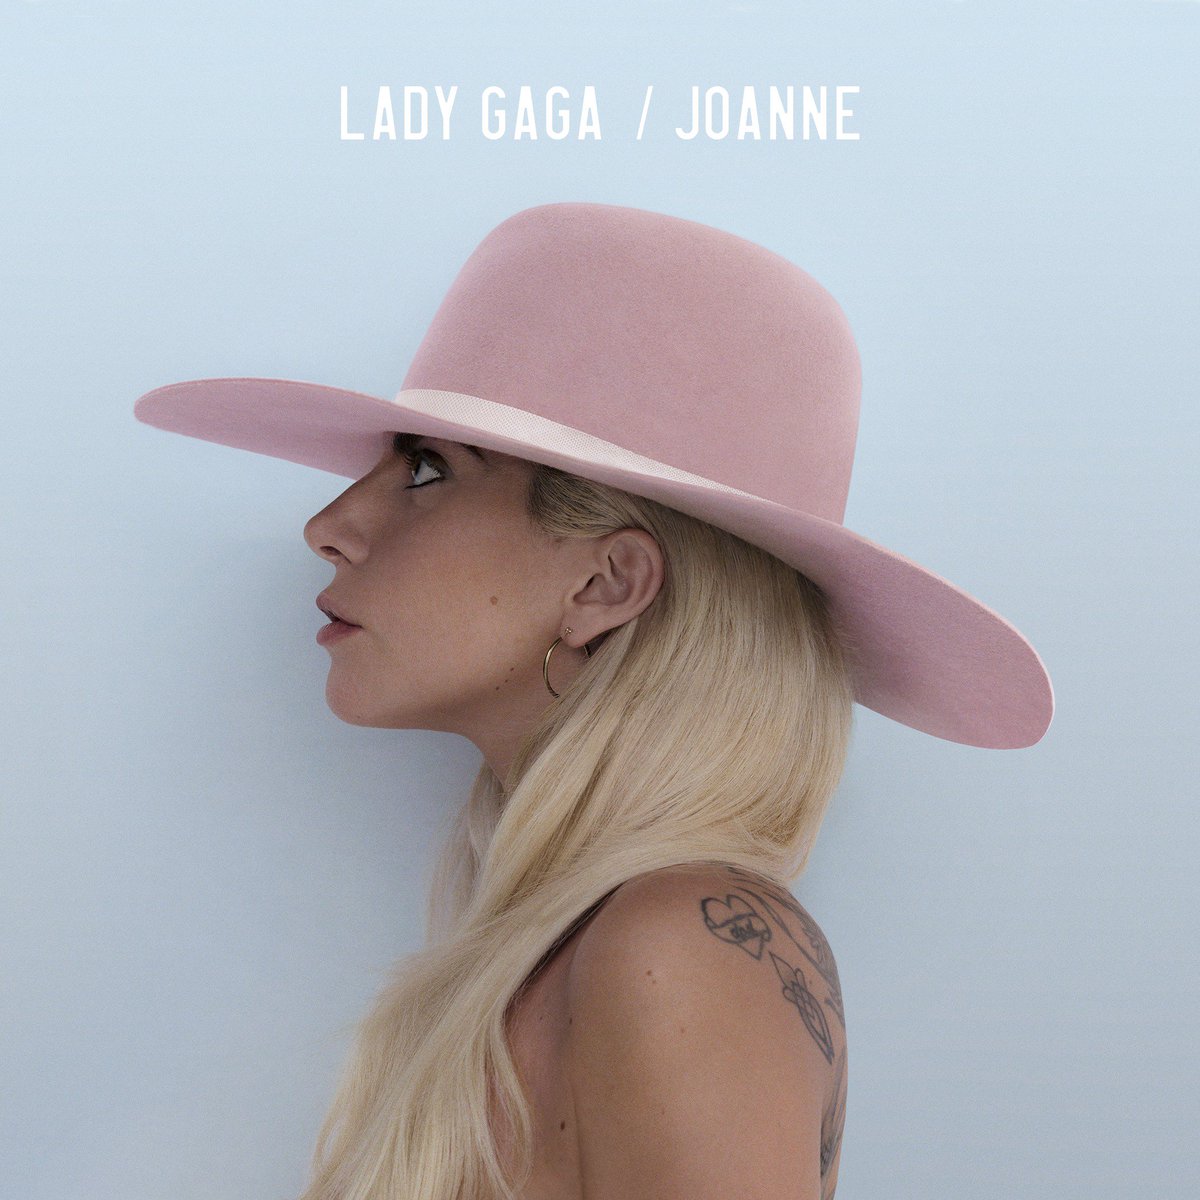 RT @AppleMusic: Announced first on @Beats1...
The new album from @ladygaga will be called #JOANNE & is expected on October 21st! https://t.…